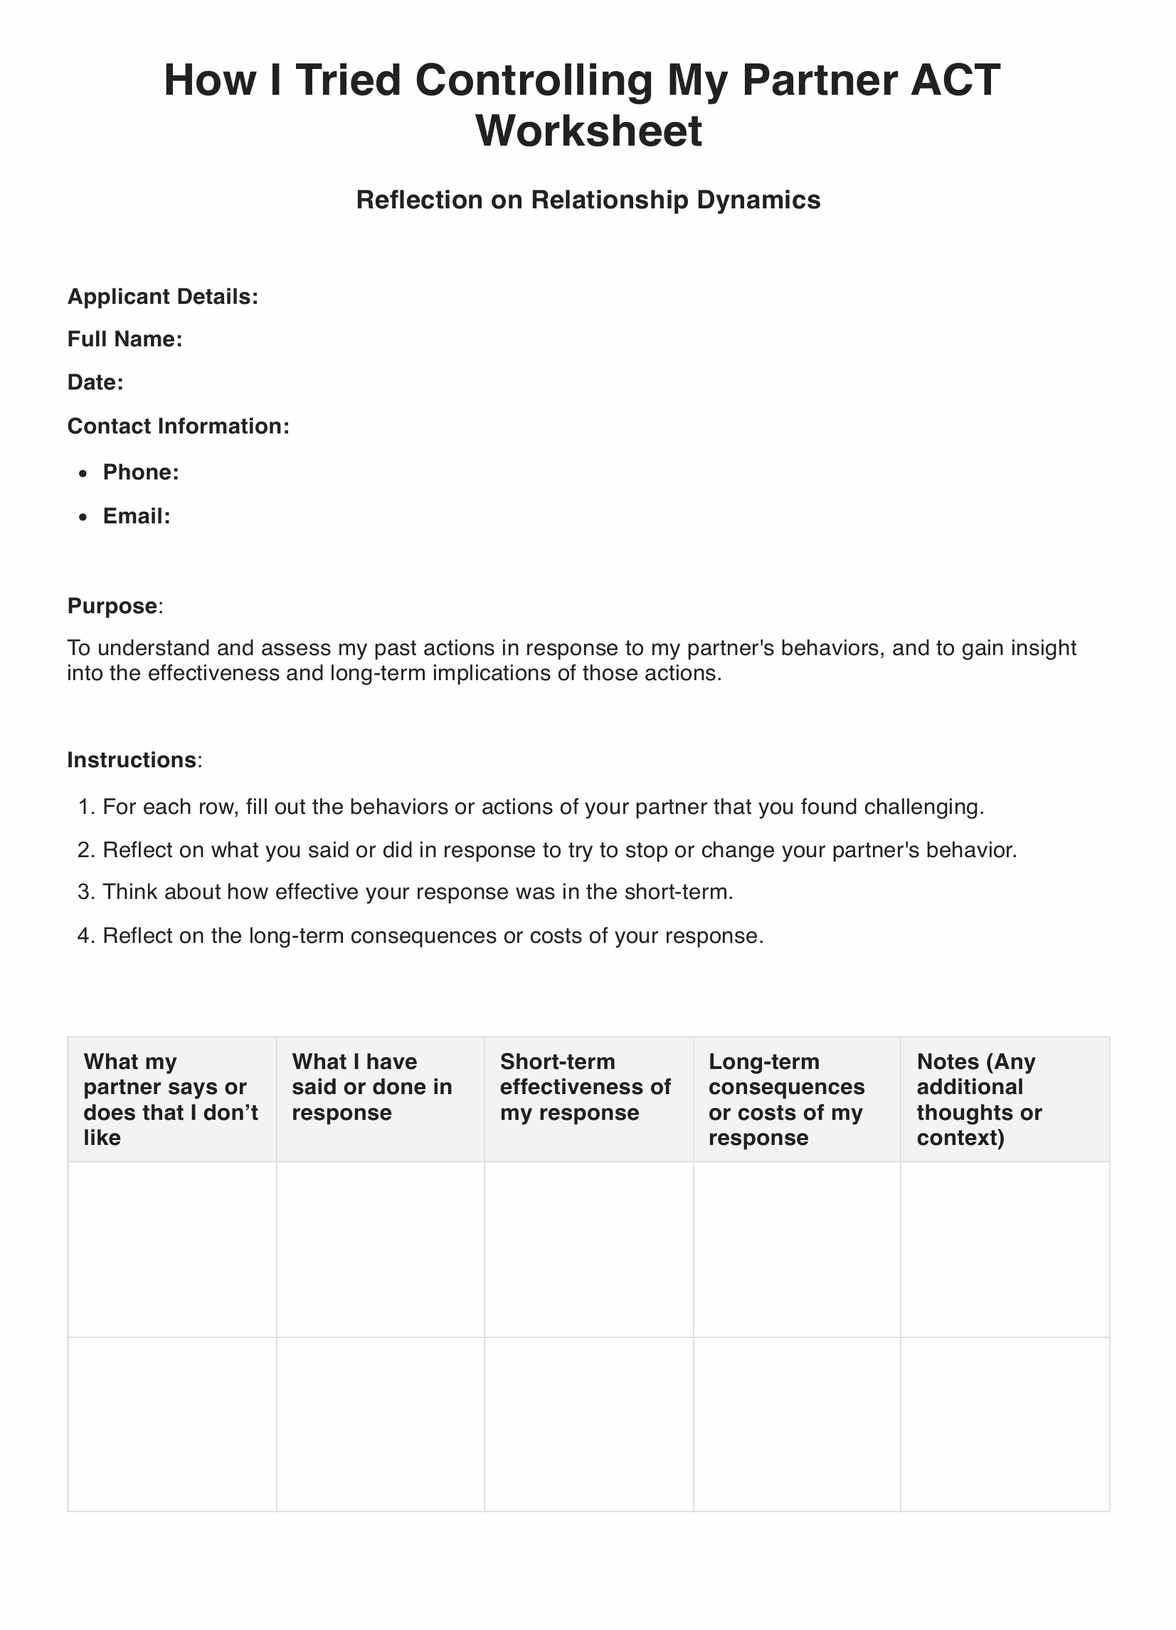 How I Tried Controlling My Partner ACT Worksheet PDF Example